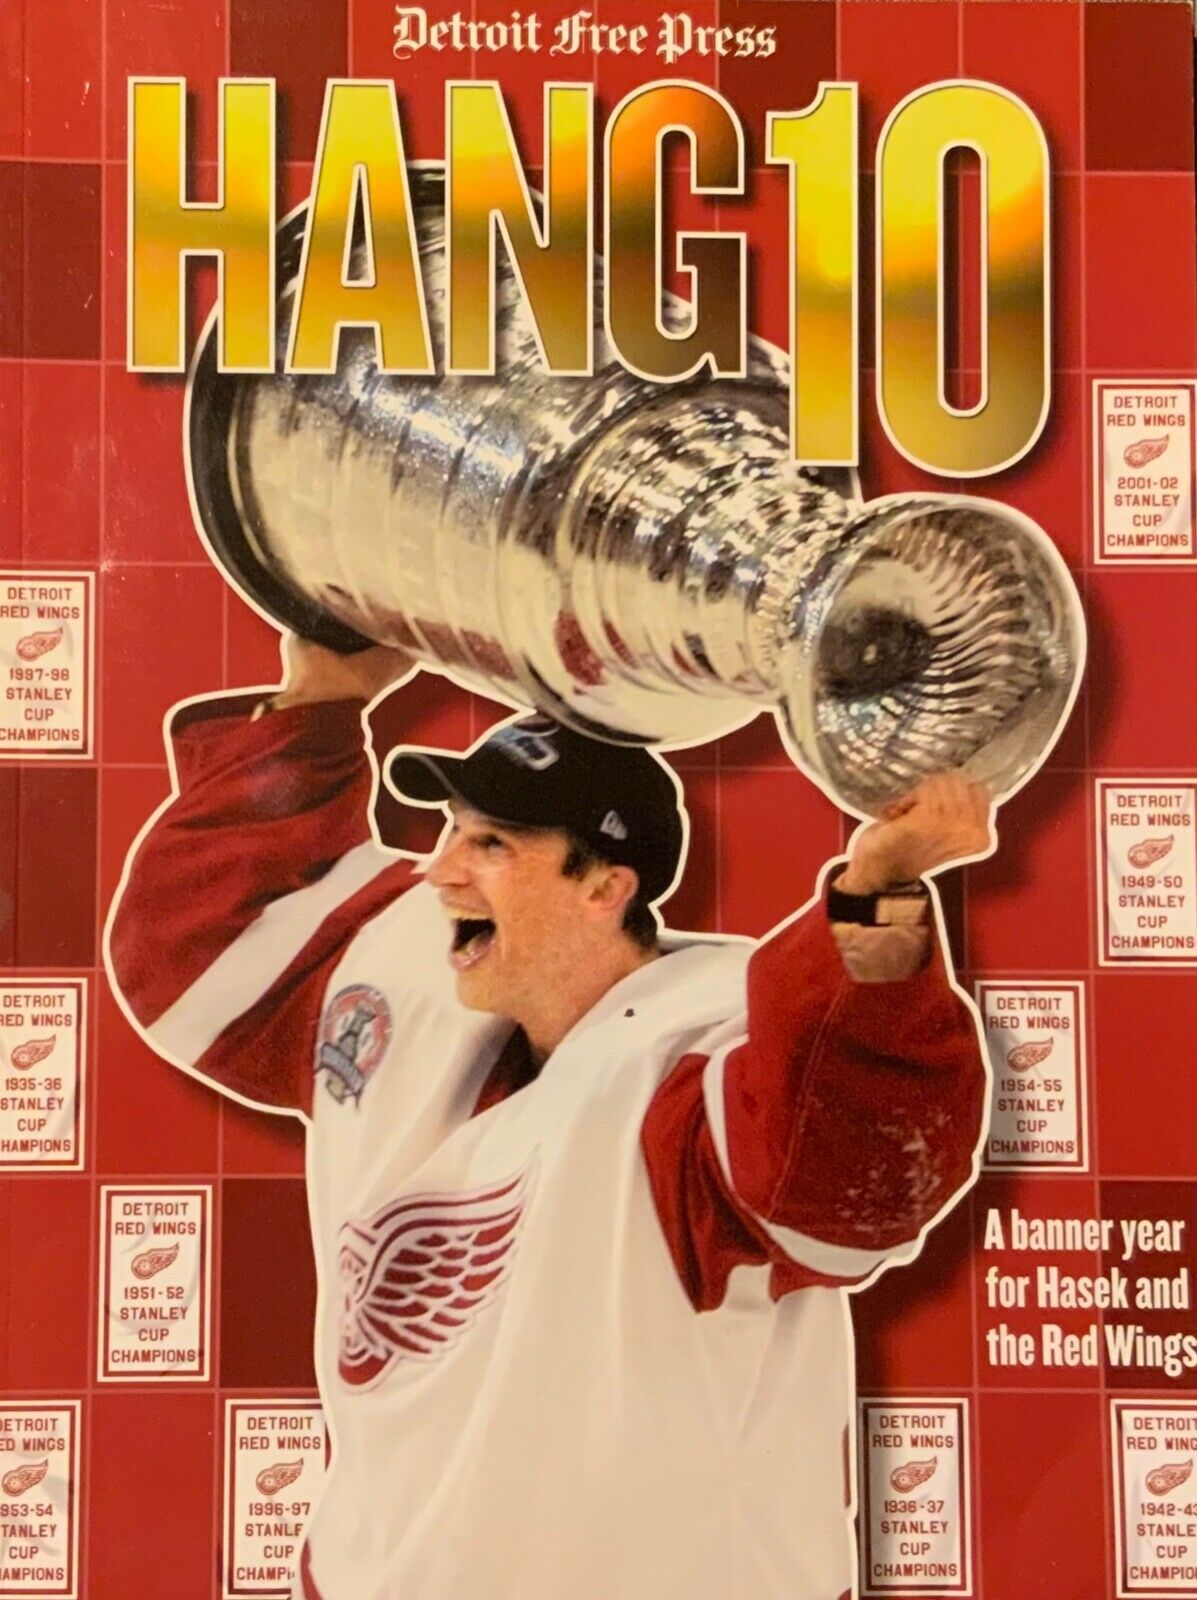 Hang 10: Detroit Red Wings 2002 Championship Commemorative Book